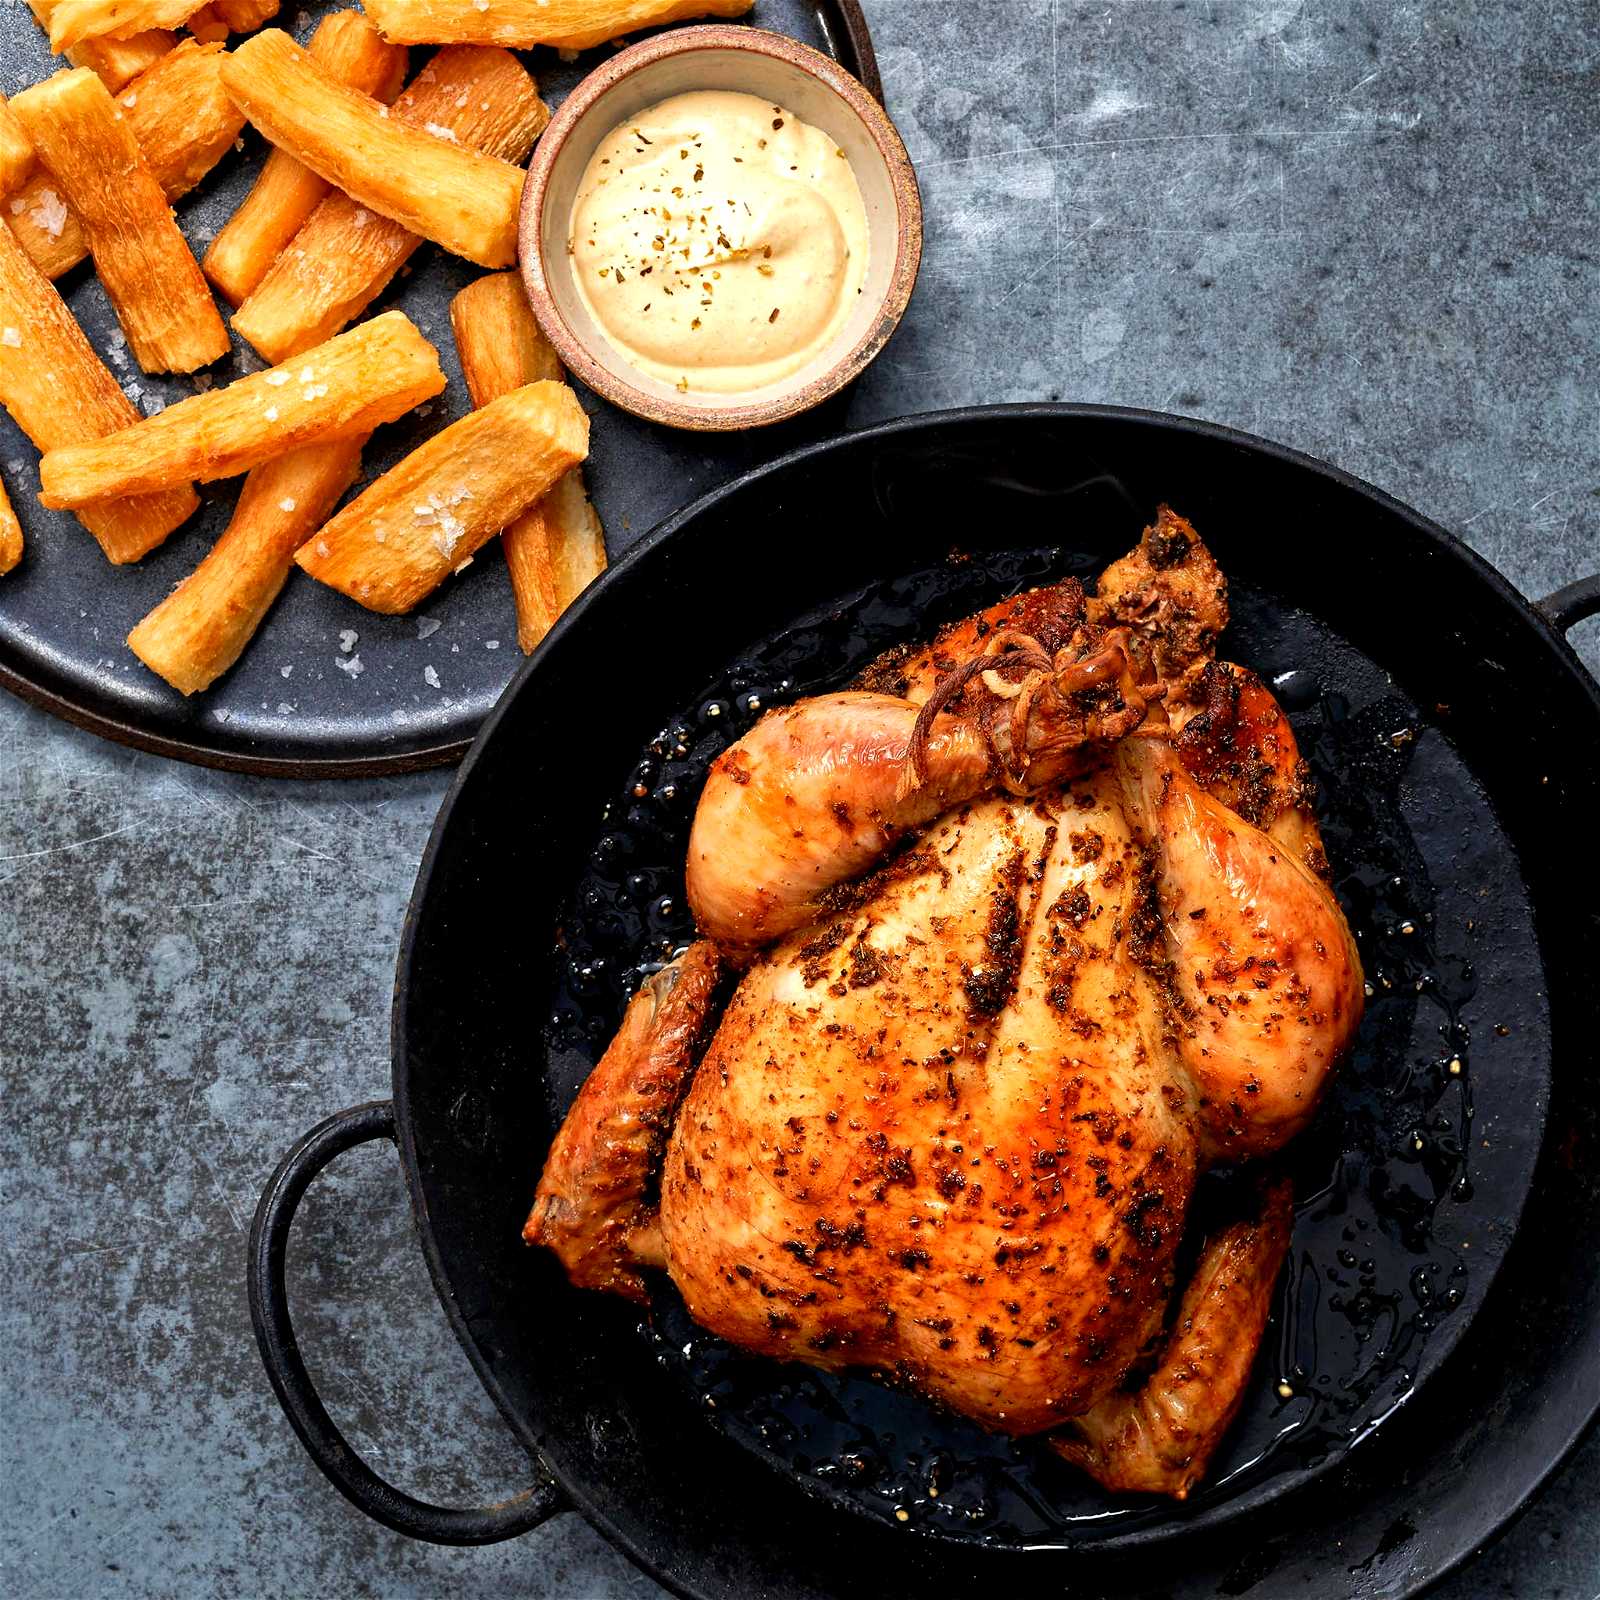 Image of Peruvian Style Roasted Chicken with Ají Amarillo Sauce and Yuca Fries